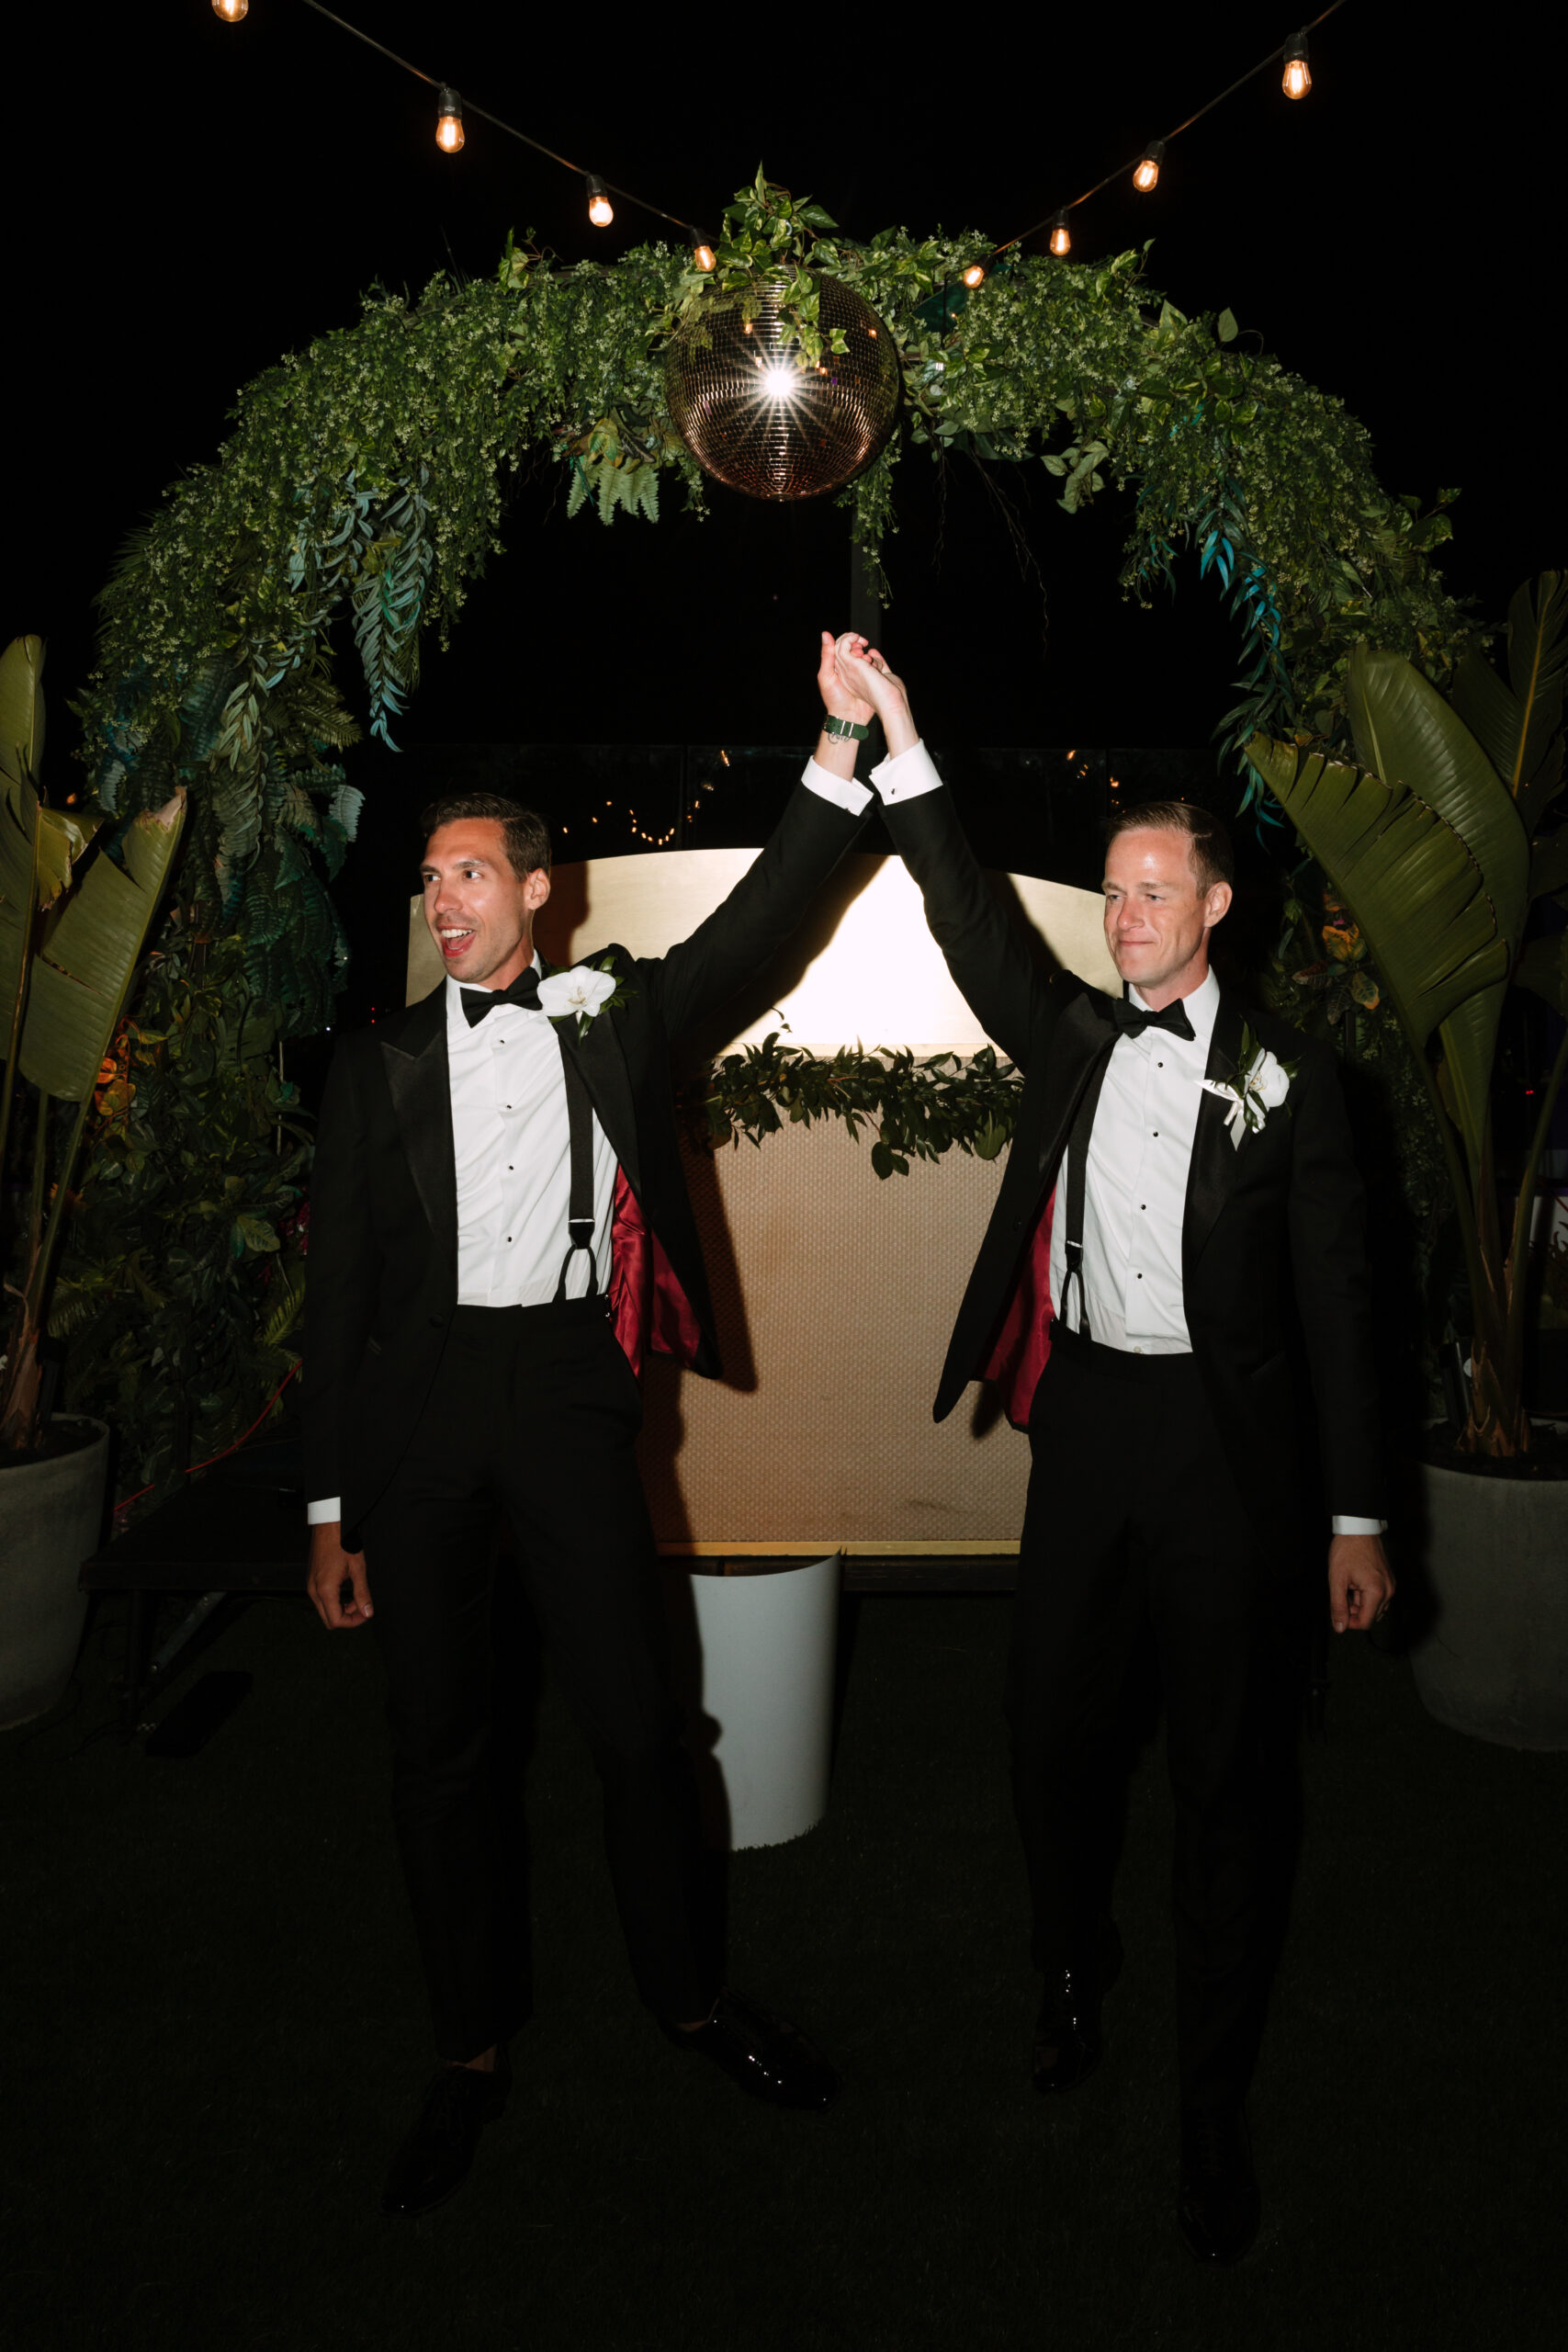 direct flash photo on Kimpton La Peer rooftop of gay grooms raising their hands in the air after their first kiss